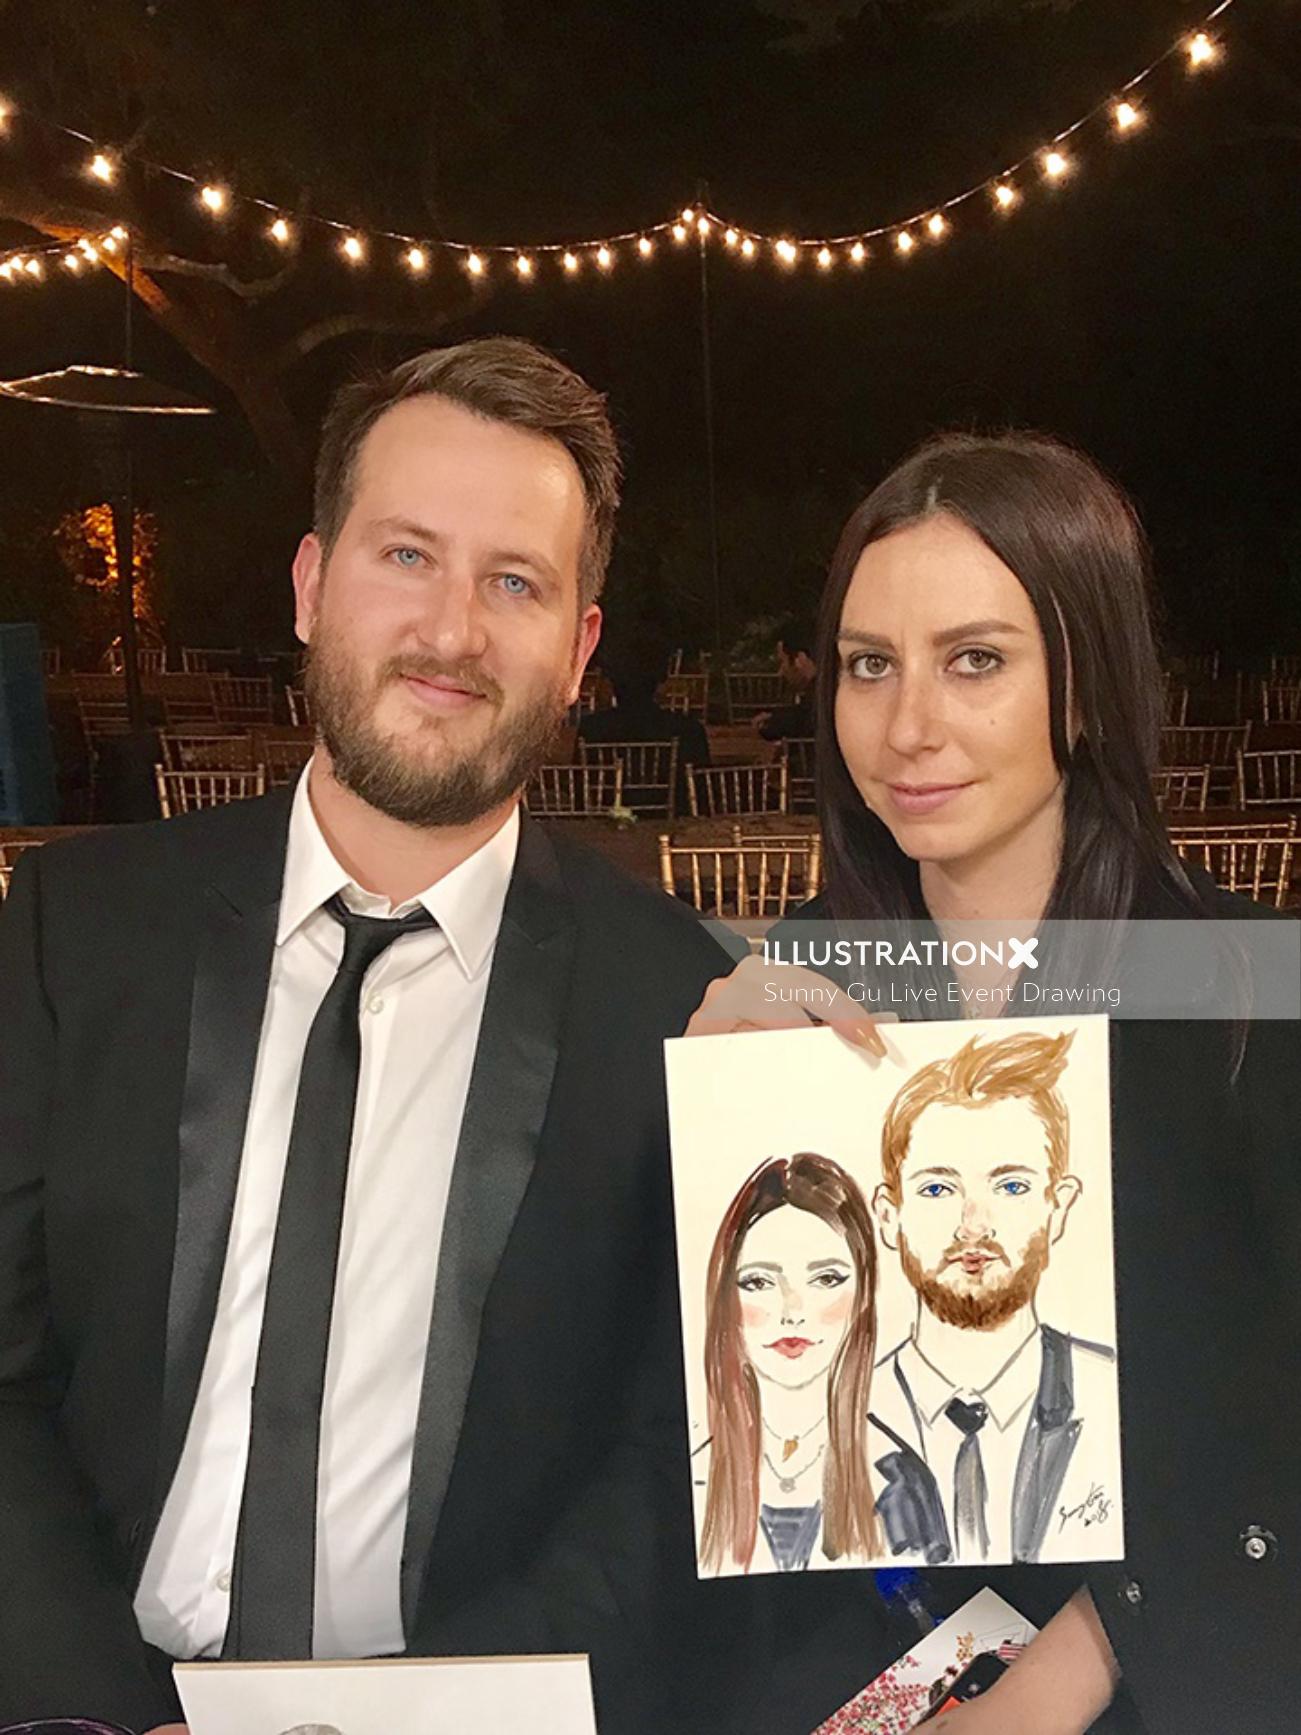 Live event drawing of couple
